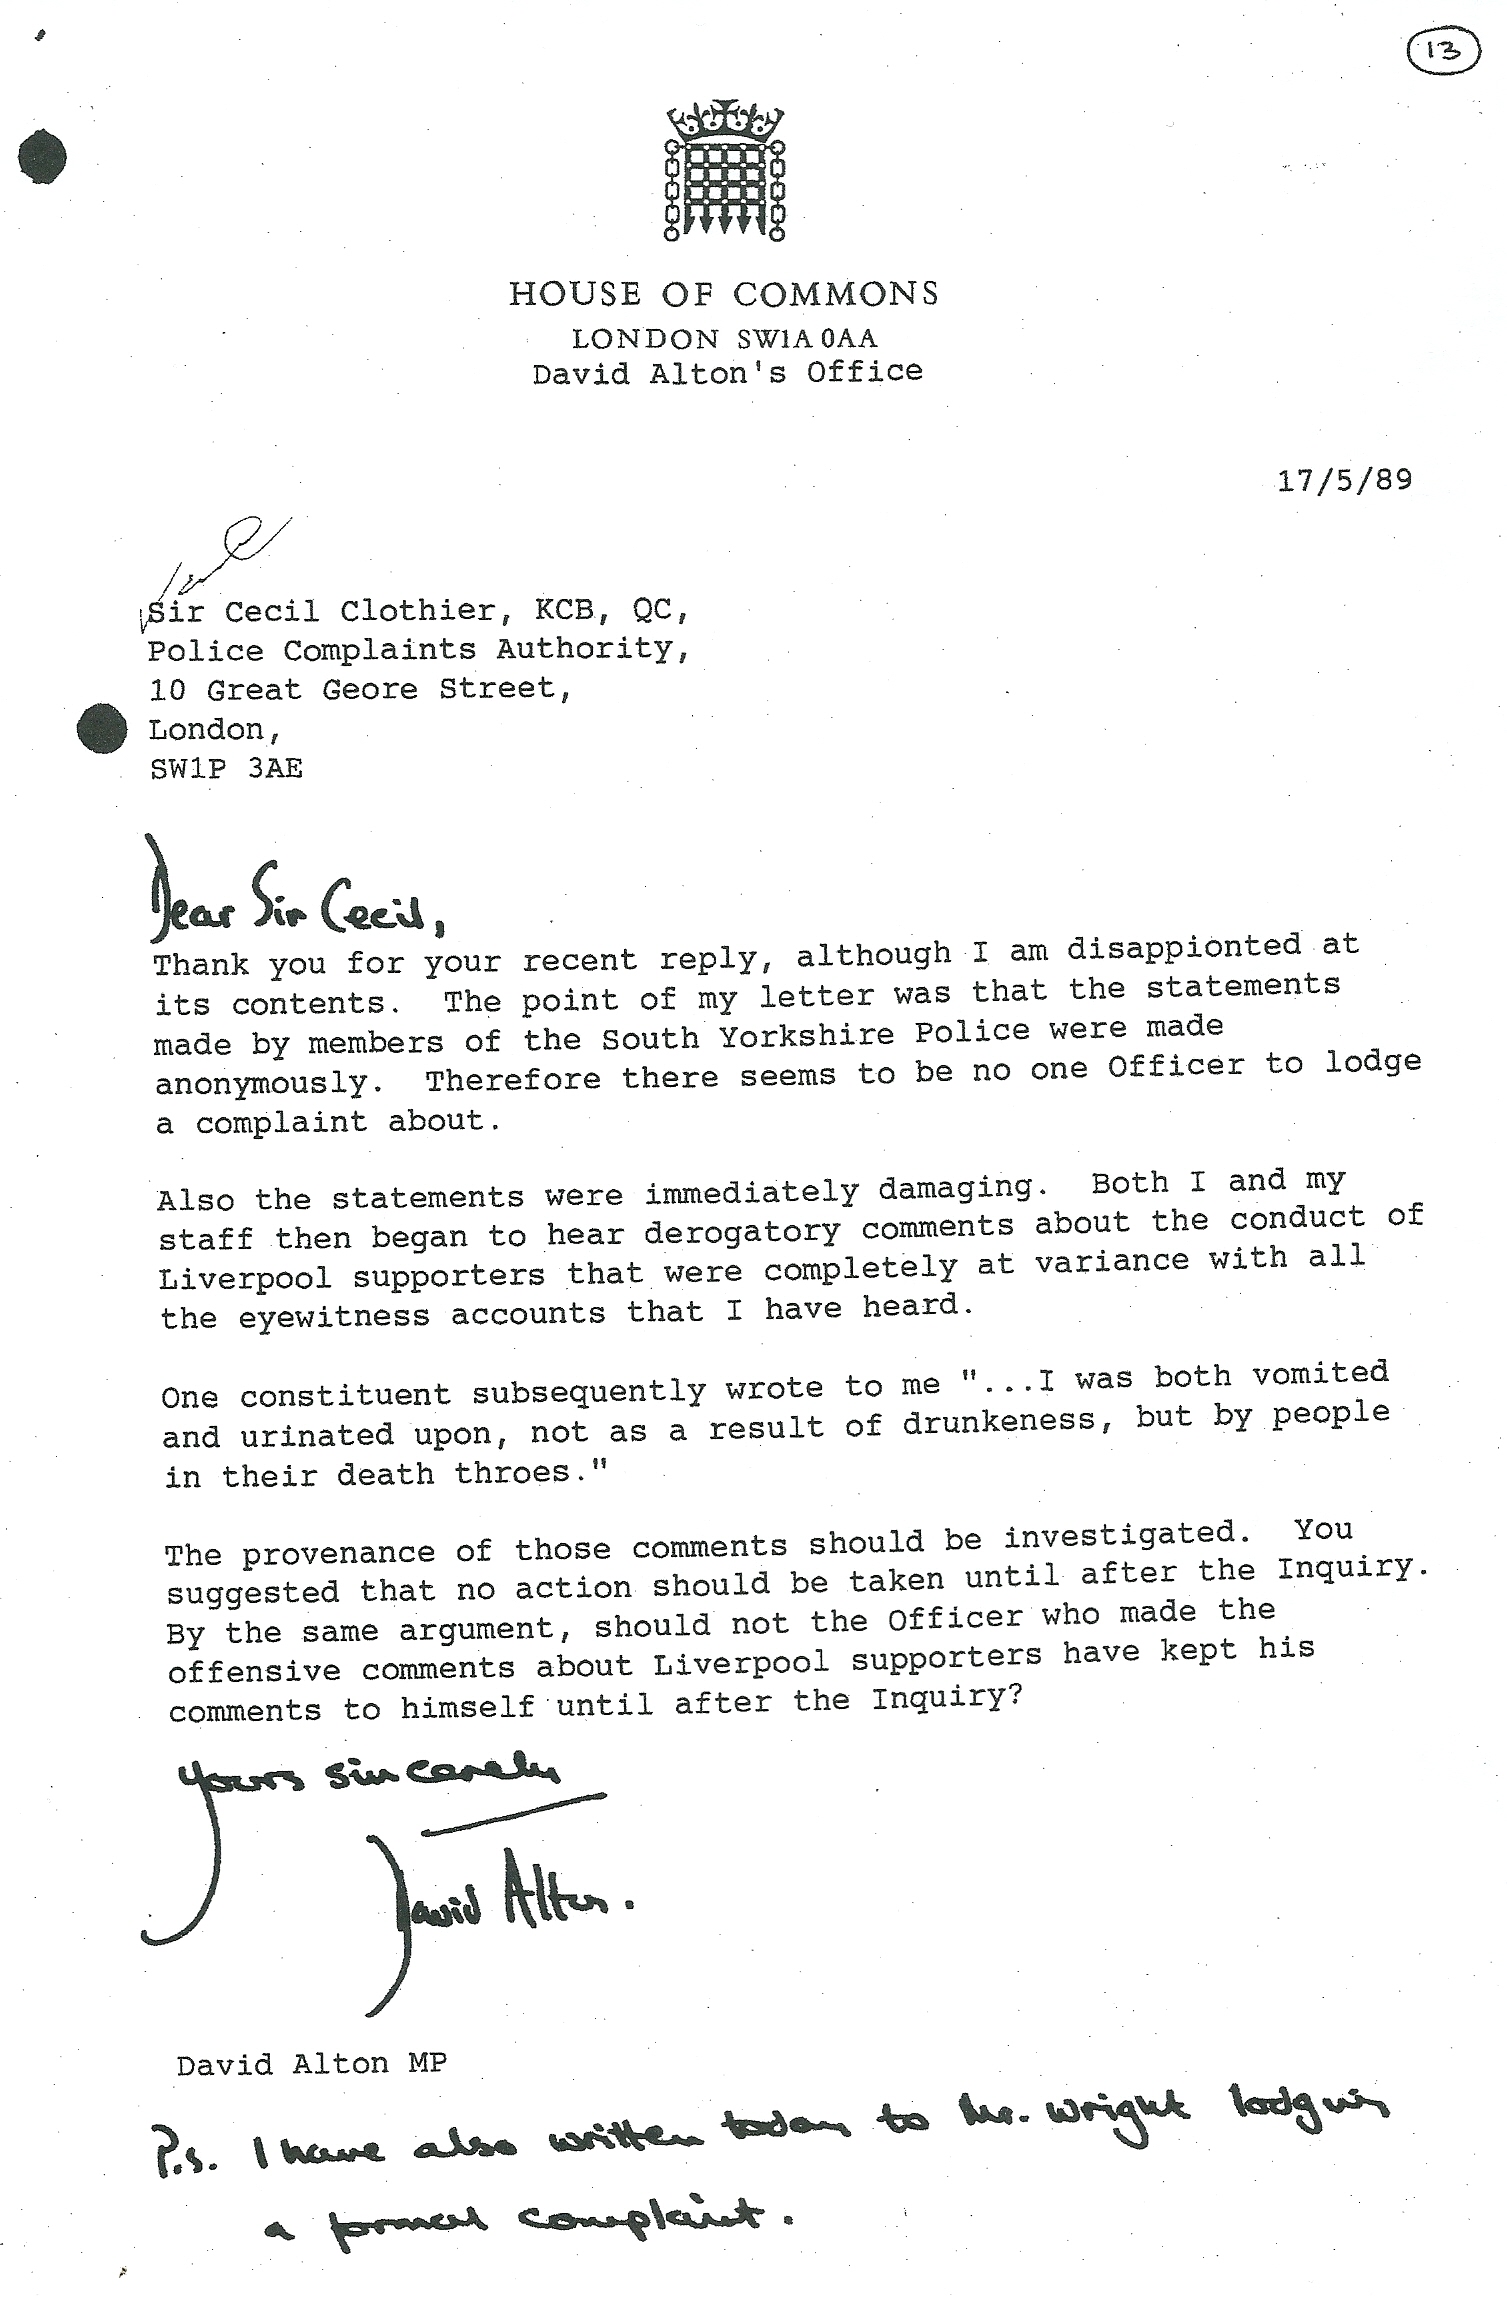 Letter to Sir Cecil Clothier, Chairman of the Police Complaints Authority, on May 17th 1989, contesting the Authority's failure to mount an investigation